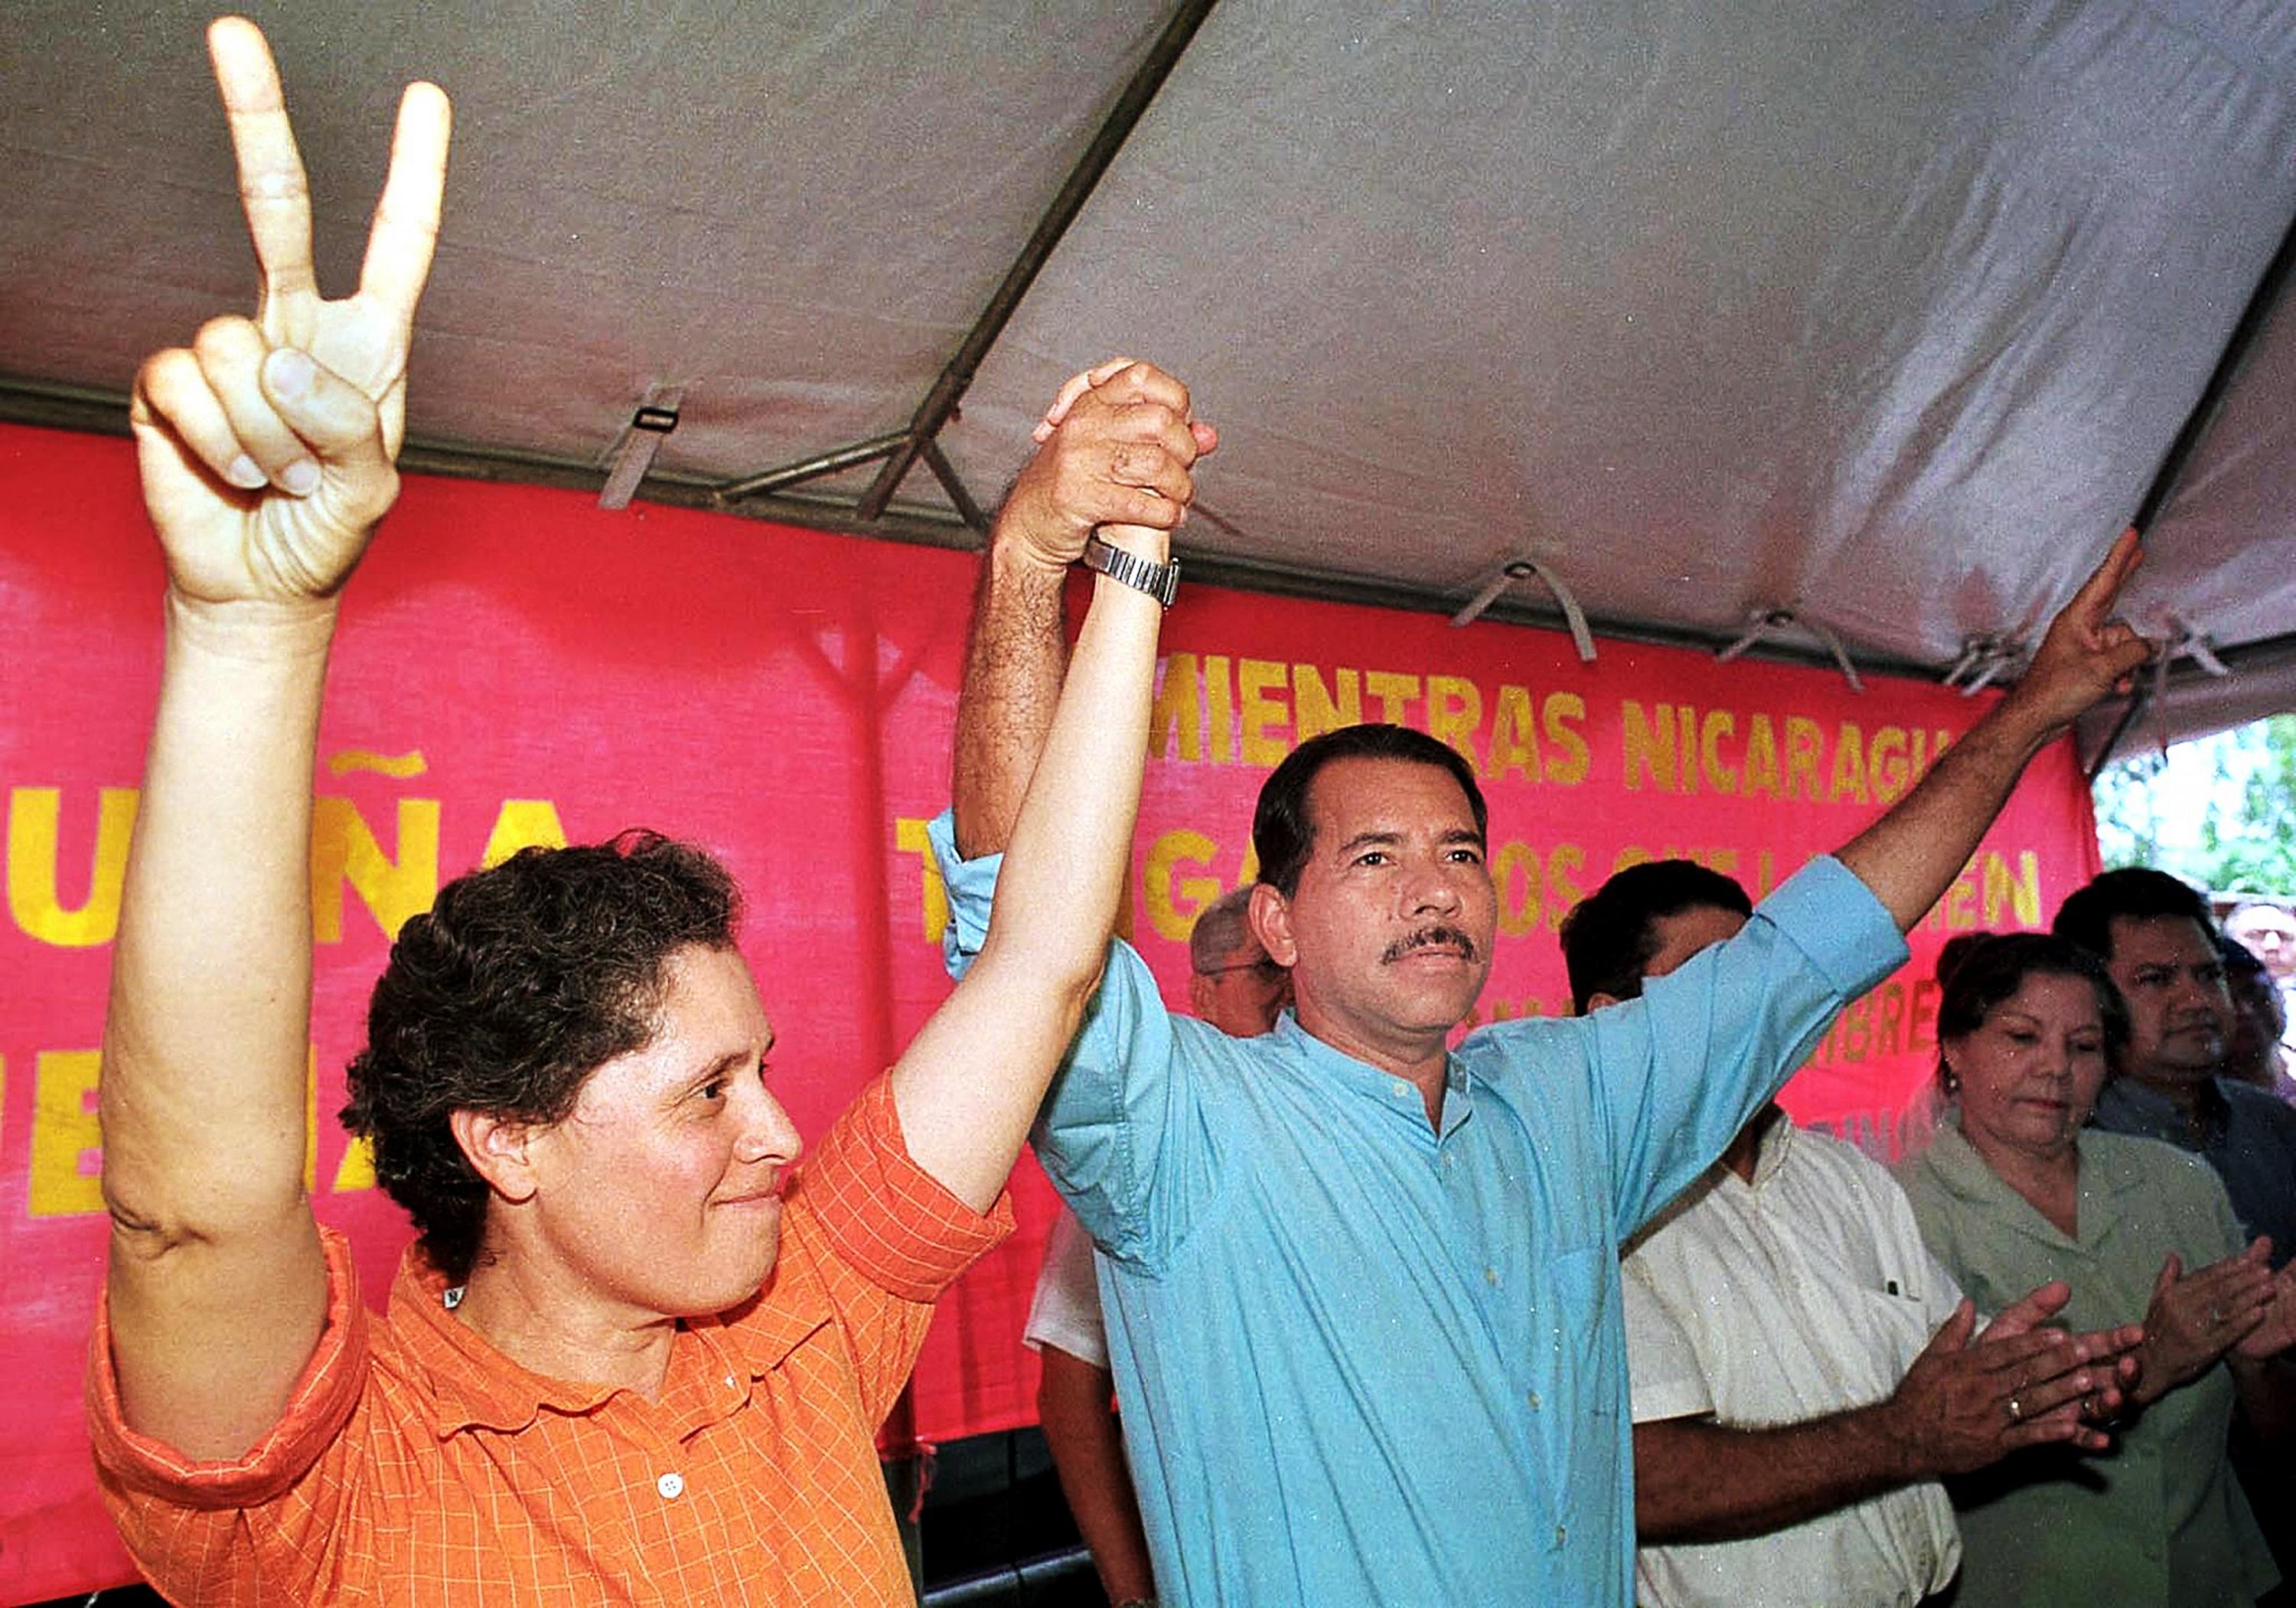 Dora María Téllez (left), president of the Sandinista Renovation Movement (MRS), and Daniel Ortega of the Sandinista National Liberation Front (FSLN) on August 28, 2001 in Managua, Nicaragua. That year the MRS supported the presidential candidacy of Ortega, who would end up losing the election to Enrique Bolaños. Photo Juan José Membreño/AFP